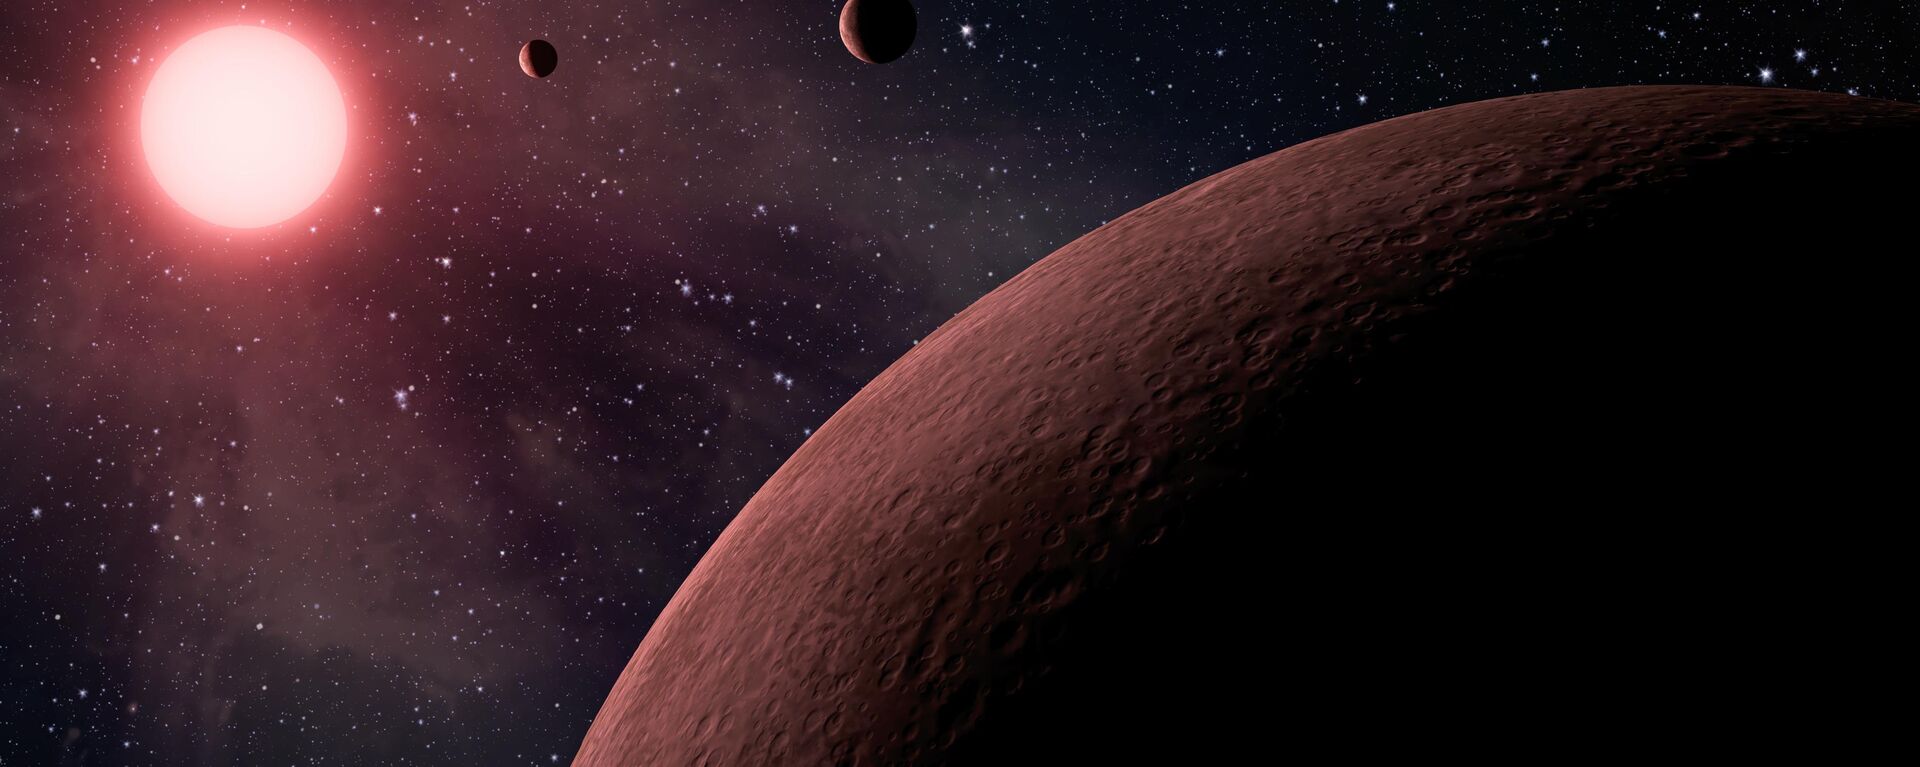 NASA’s Kepler space telescope team has identified 219 new planet candidates, 10 of which are near-Earth size and in the habitable zone of their star - Sputnik International, 1920, 28.02.2020